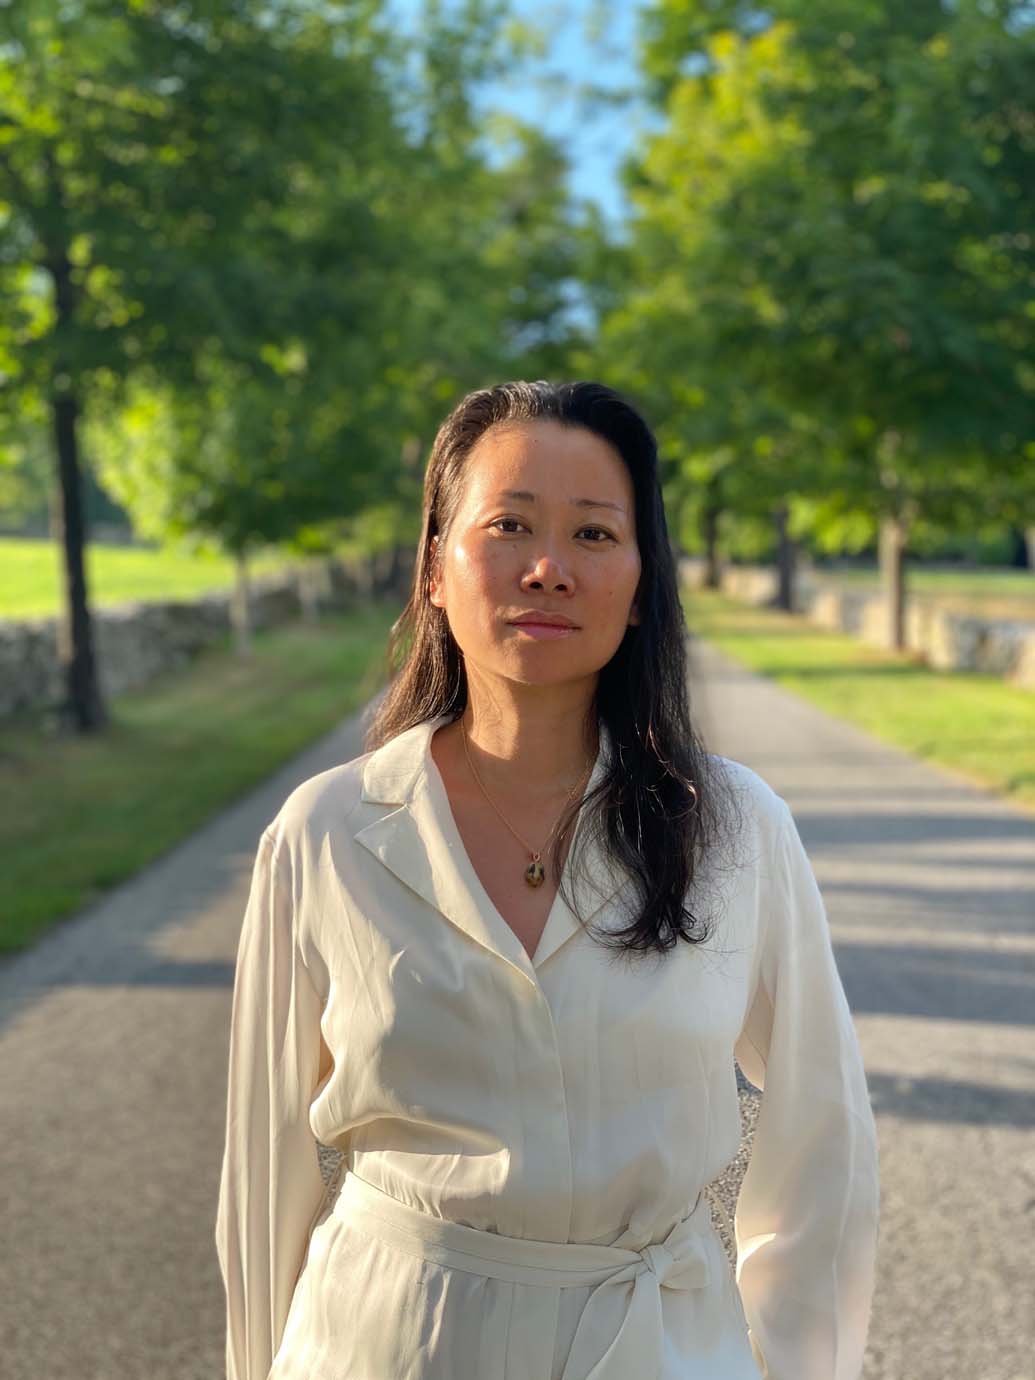 Wen Zhou’s partner Esteban Gomez uses the iPhone to take her portrait in Kent, Connecticut.